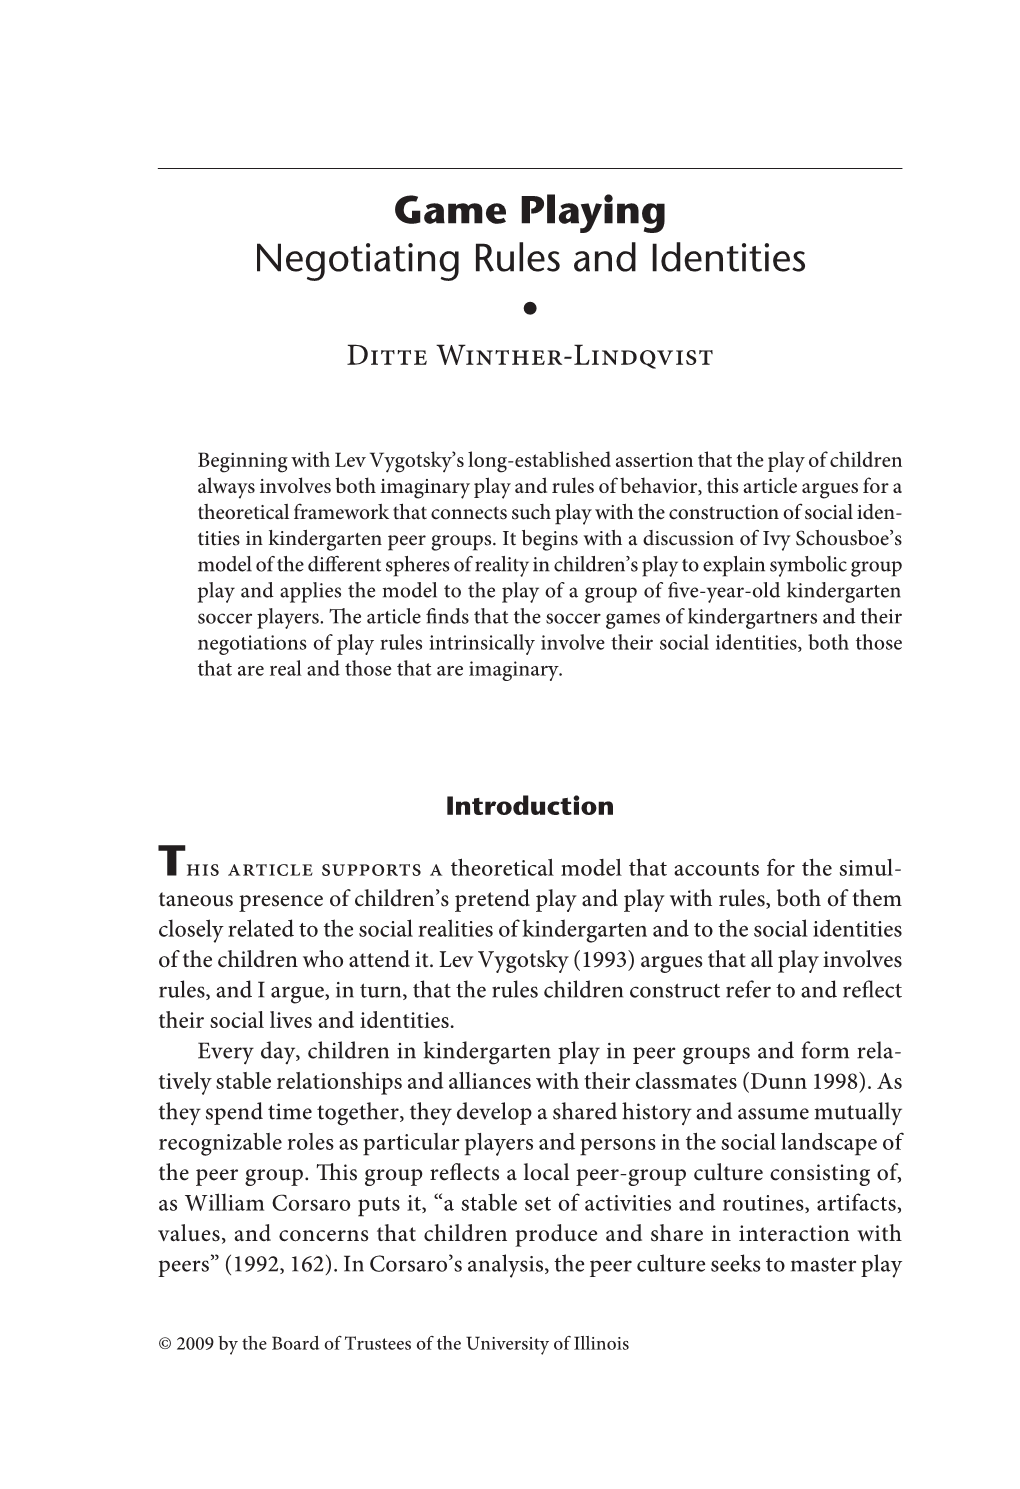 Ditte Winther-Lindqvist: Game Playing Negotiating Rules and Identities